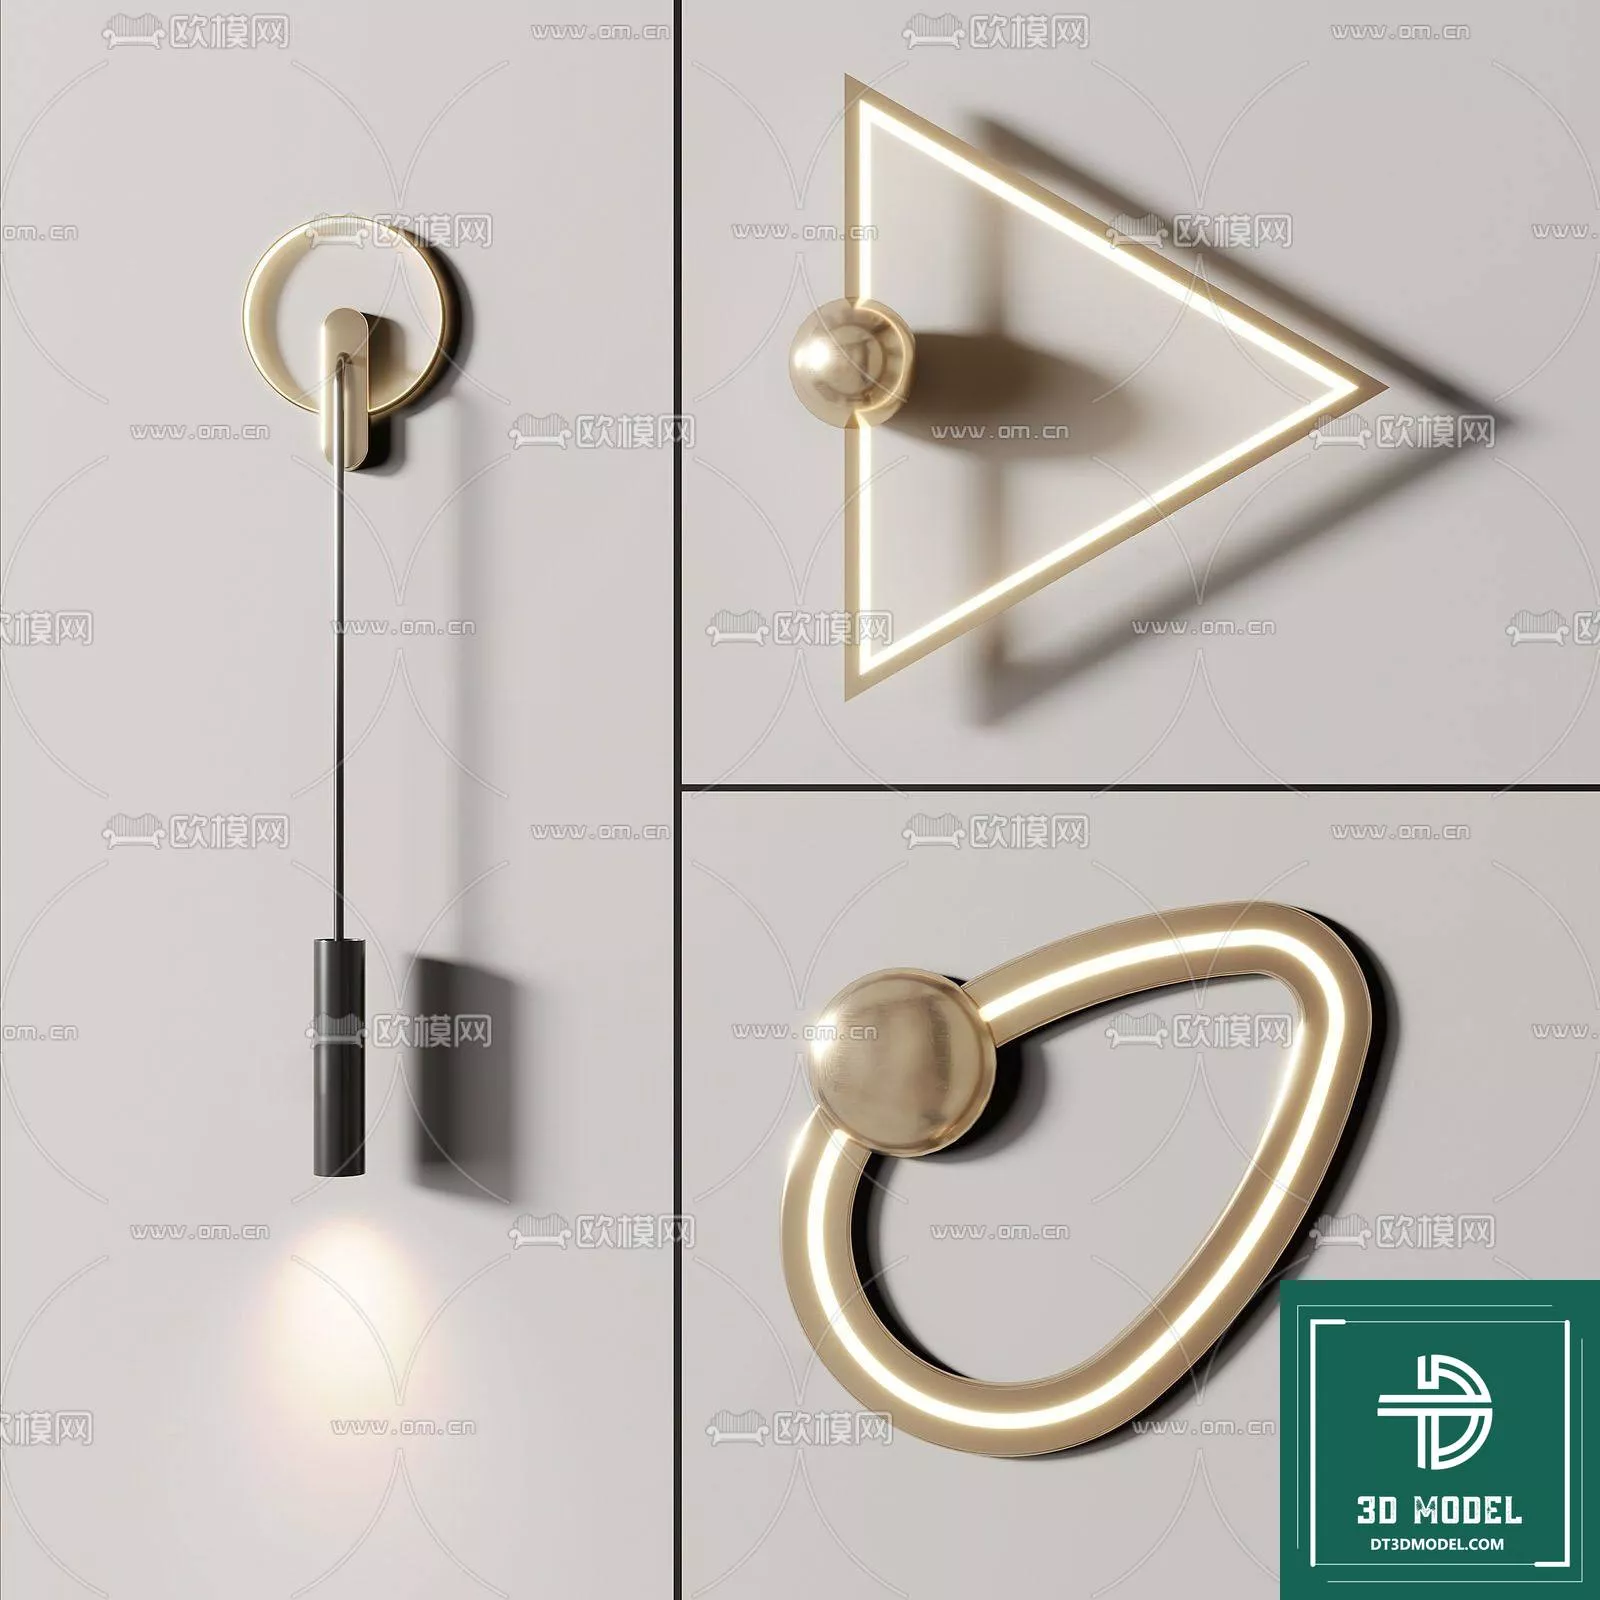 MODERN WALL LAMP - SKETCHUP 3D MODEL - VRAY OR ENSCAPE - ID16054